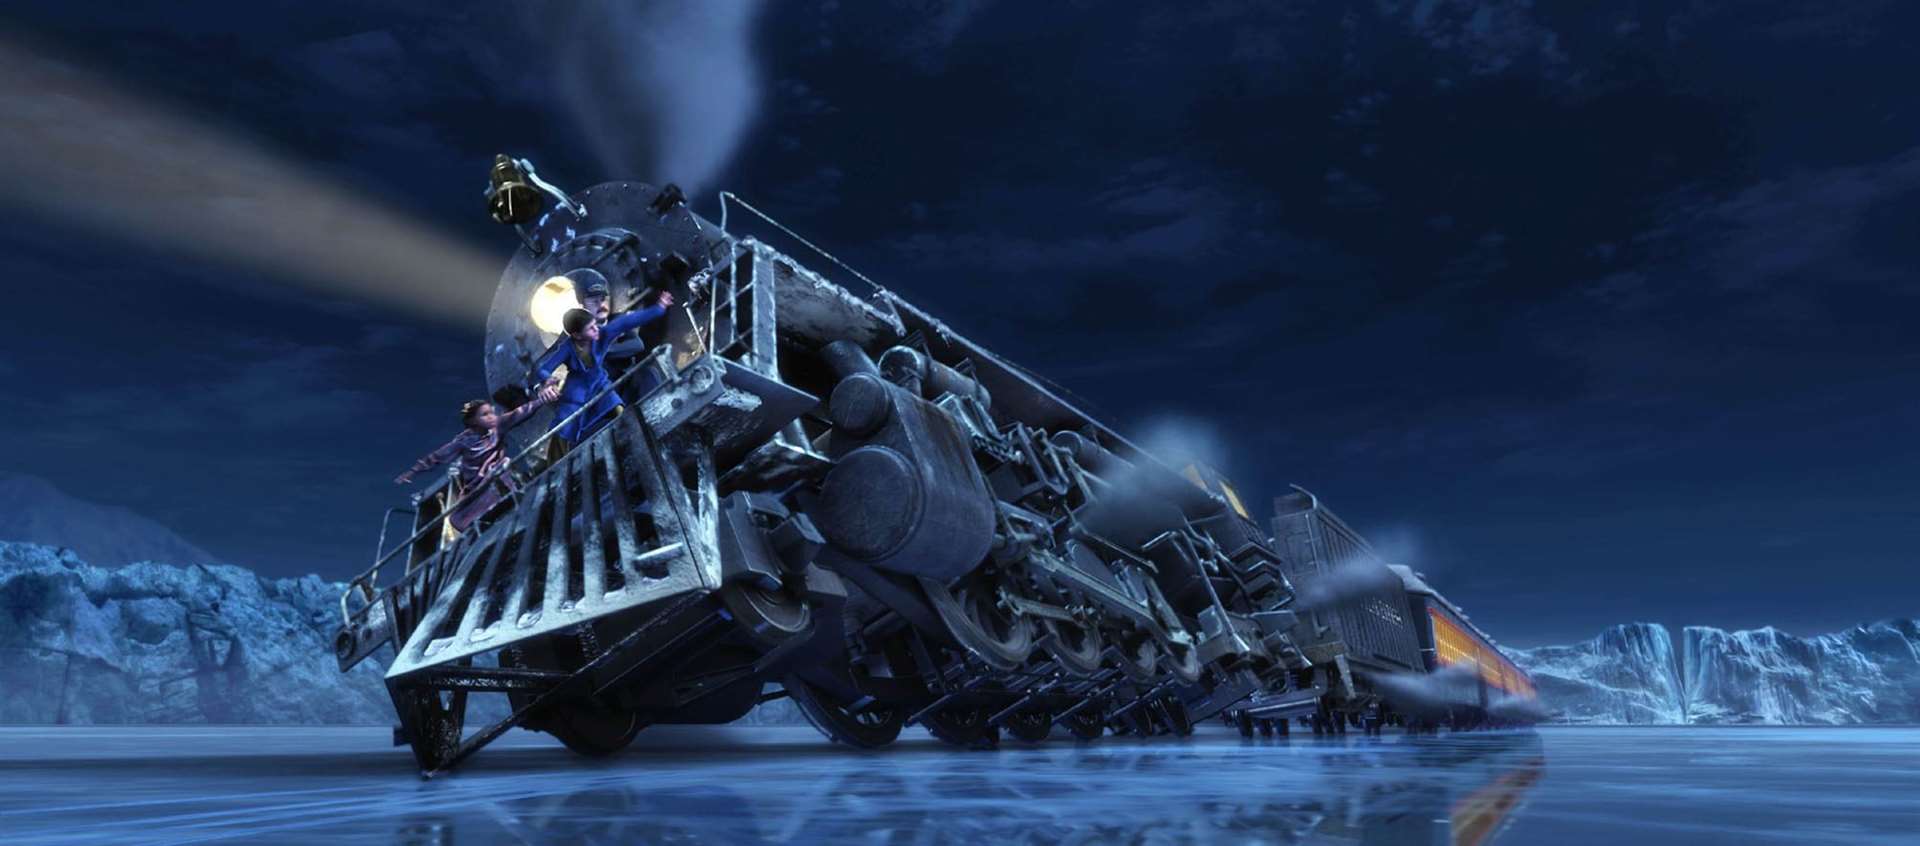 The Polar Express. Picture courtesy of :Warner Bros